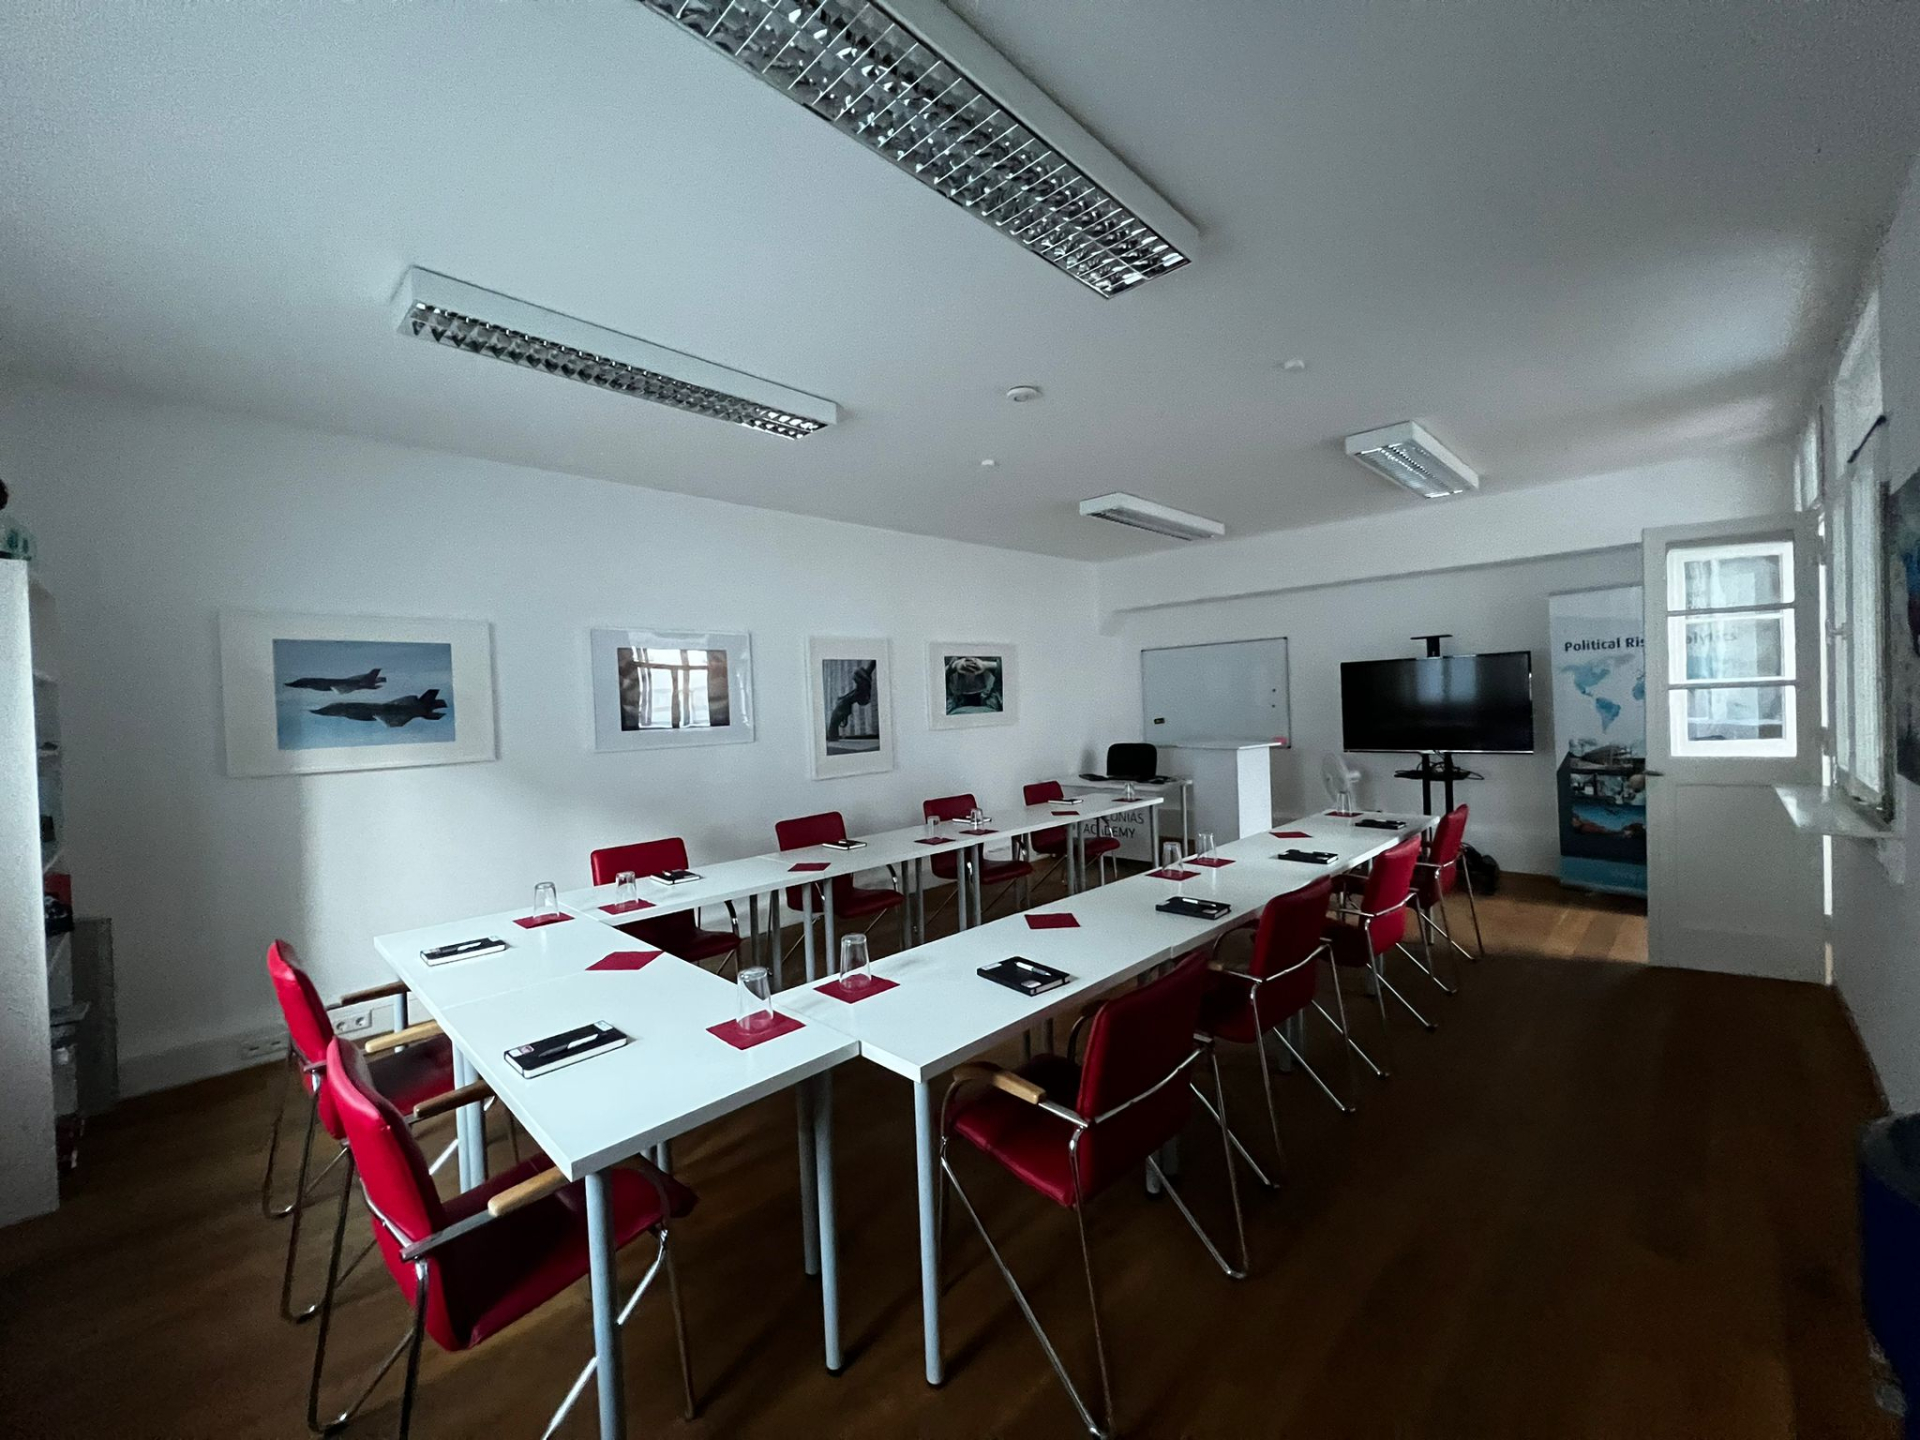 A training room in the building of the CONIAS Academy in the center of Heidelberg.